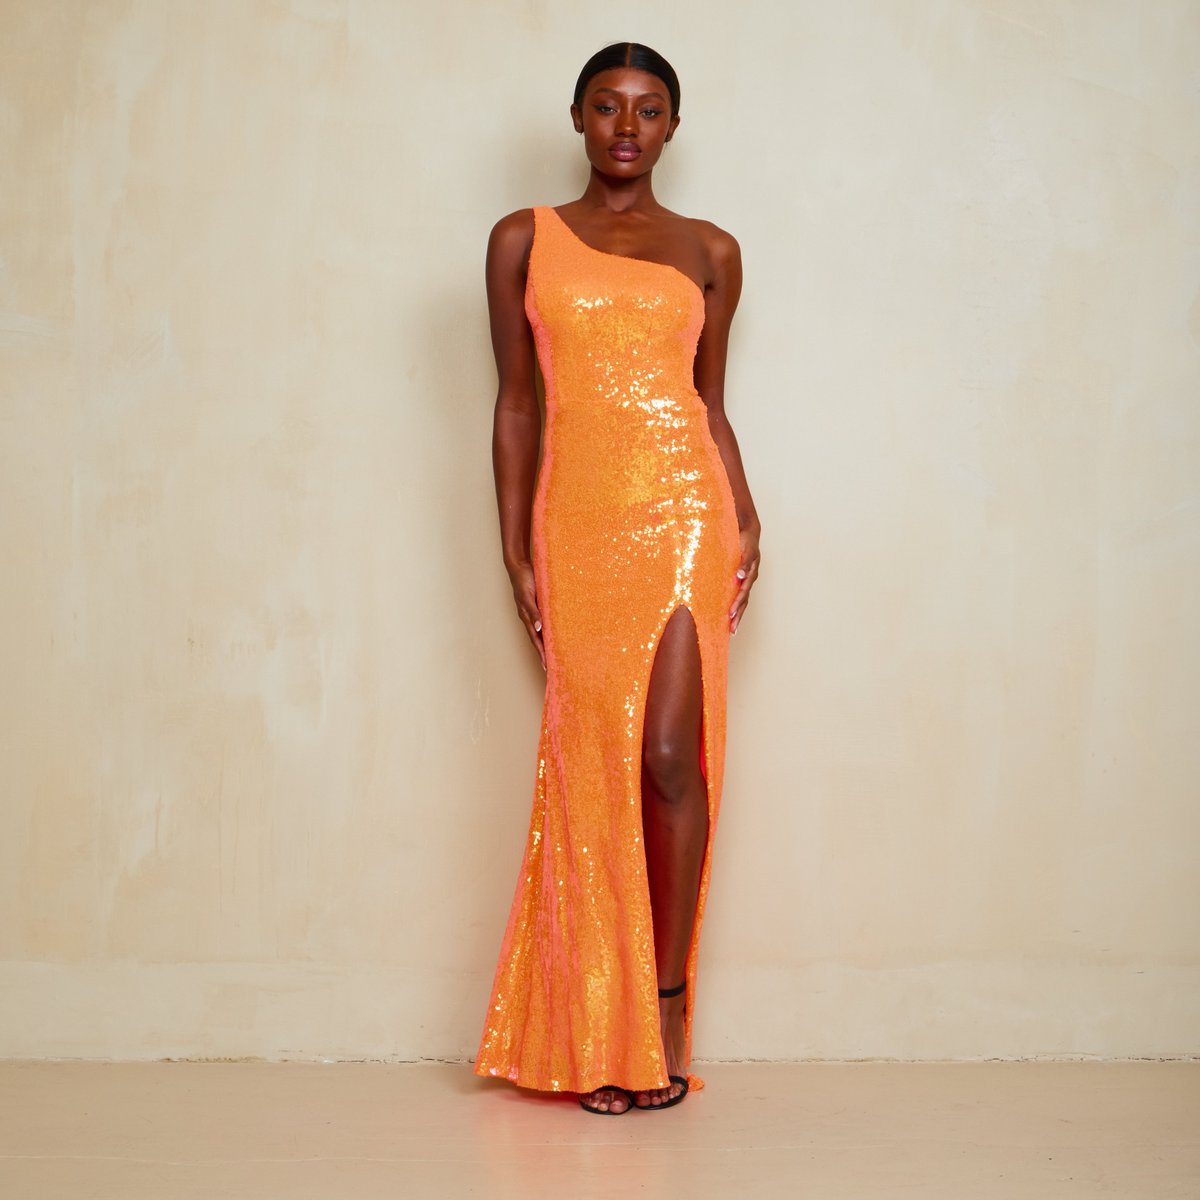 Now is your time to shine! Make a statement at prom this year in this gorgeous one shoulder orange sequin dress from B. Darlin! Shop now: tinyurl.com/2bzdw3mw